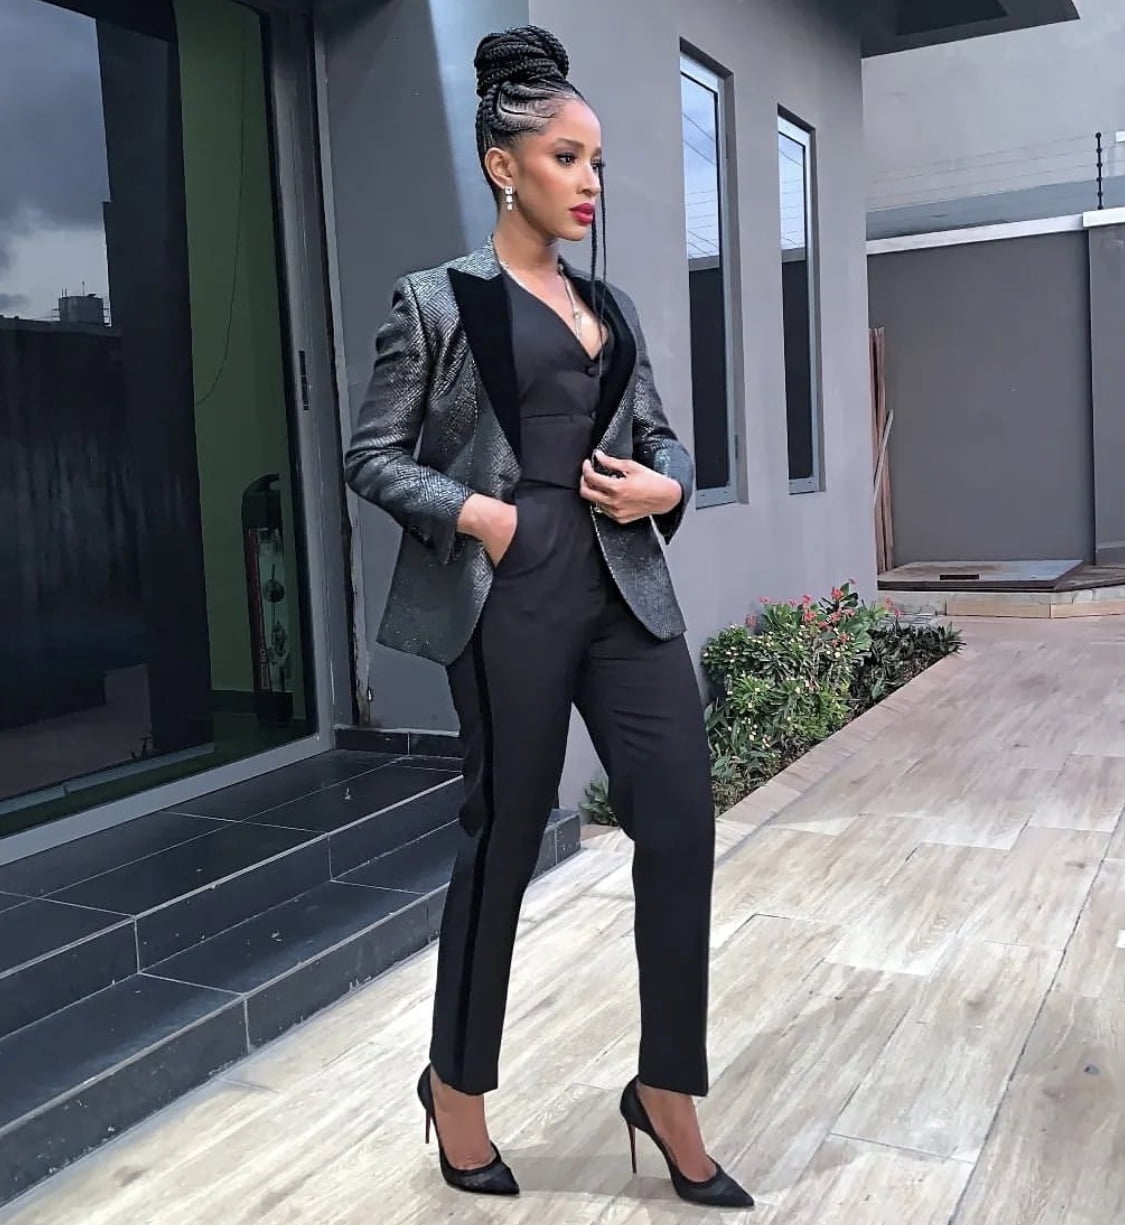 Adesua Etomi in a suit, paired with high heels.